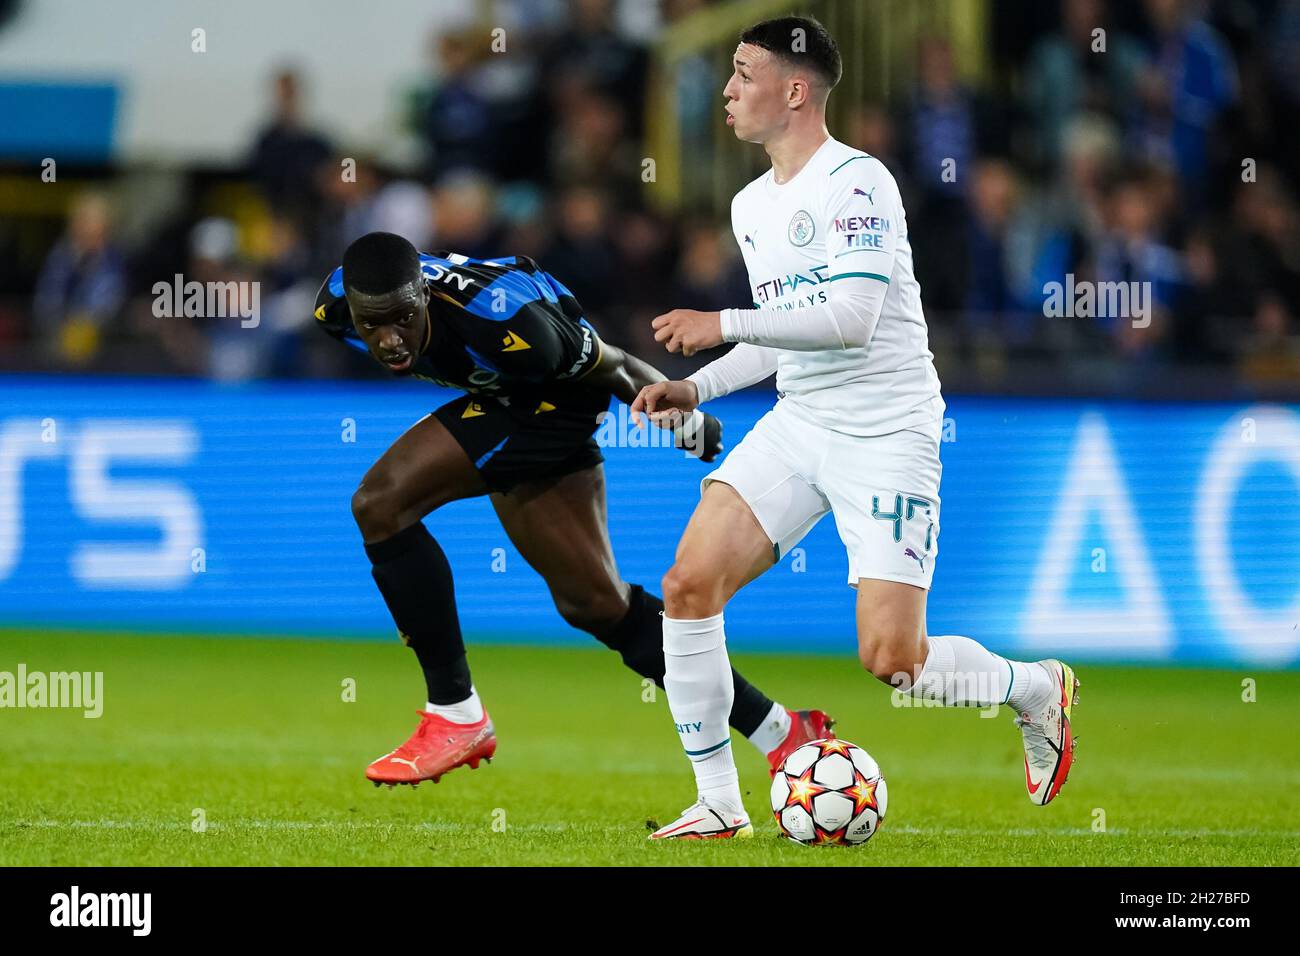 BRUGGE, BELGIUM - OCTOBER 19: Stanley Nsoki of Club Brugge and Phil Foden of Manchester City during the Group A - UEFA Champions League match between Club Brugge KV and Manchester City at Jan Breydelstadion on October 19, 2021 in Brugge, Belgium (Photo by Jeroen Meuwsen/Orange Pictures) Stock Photo